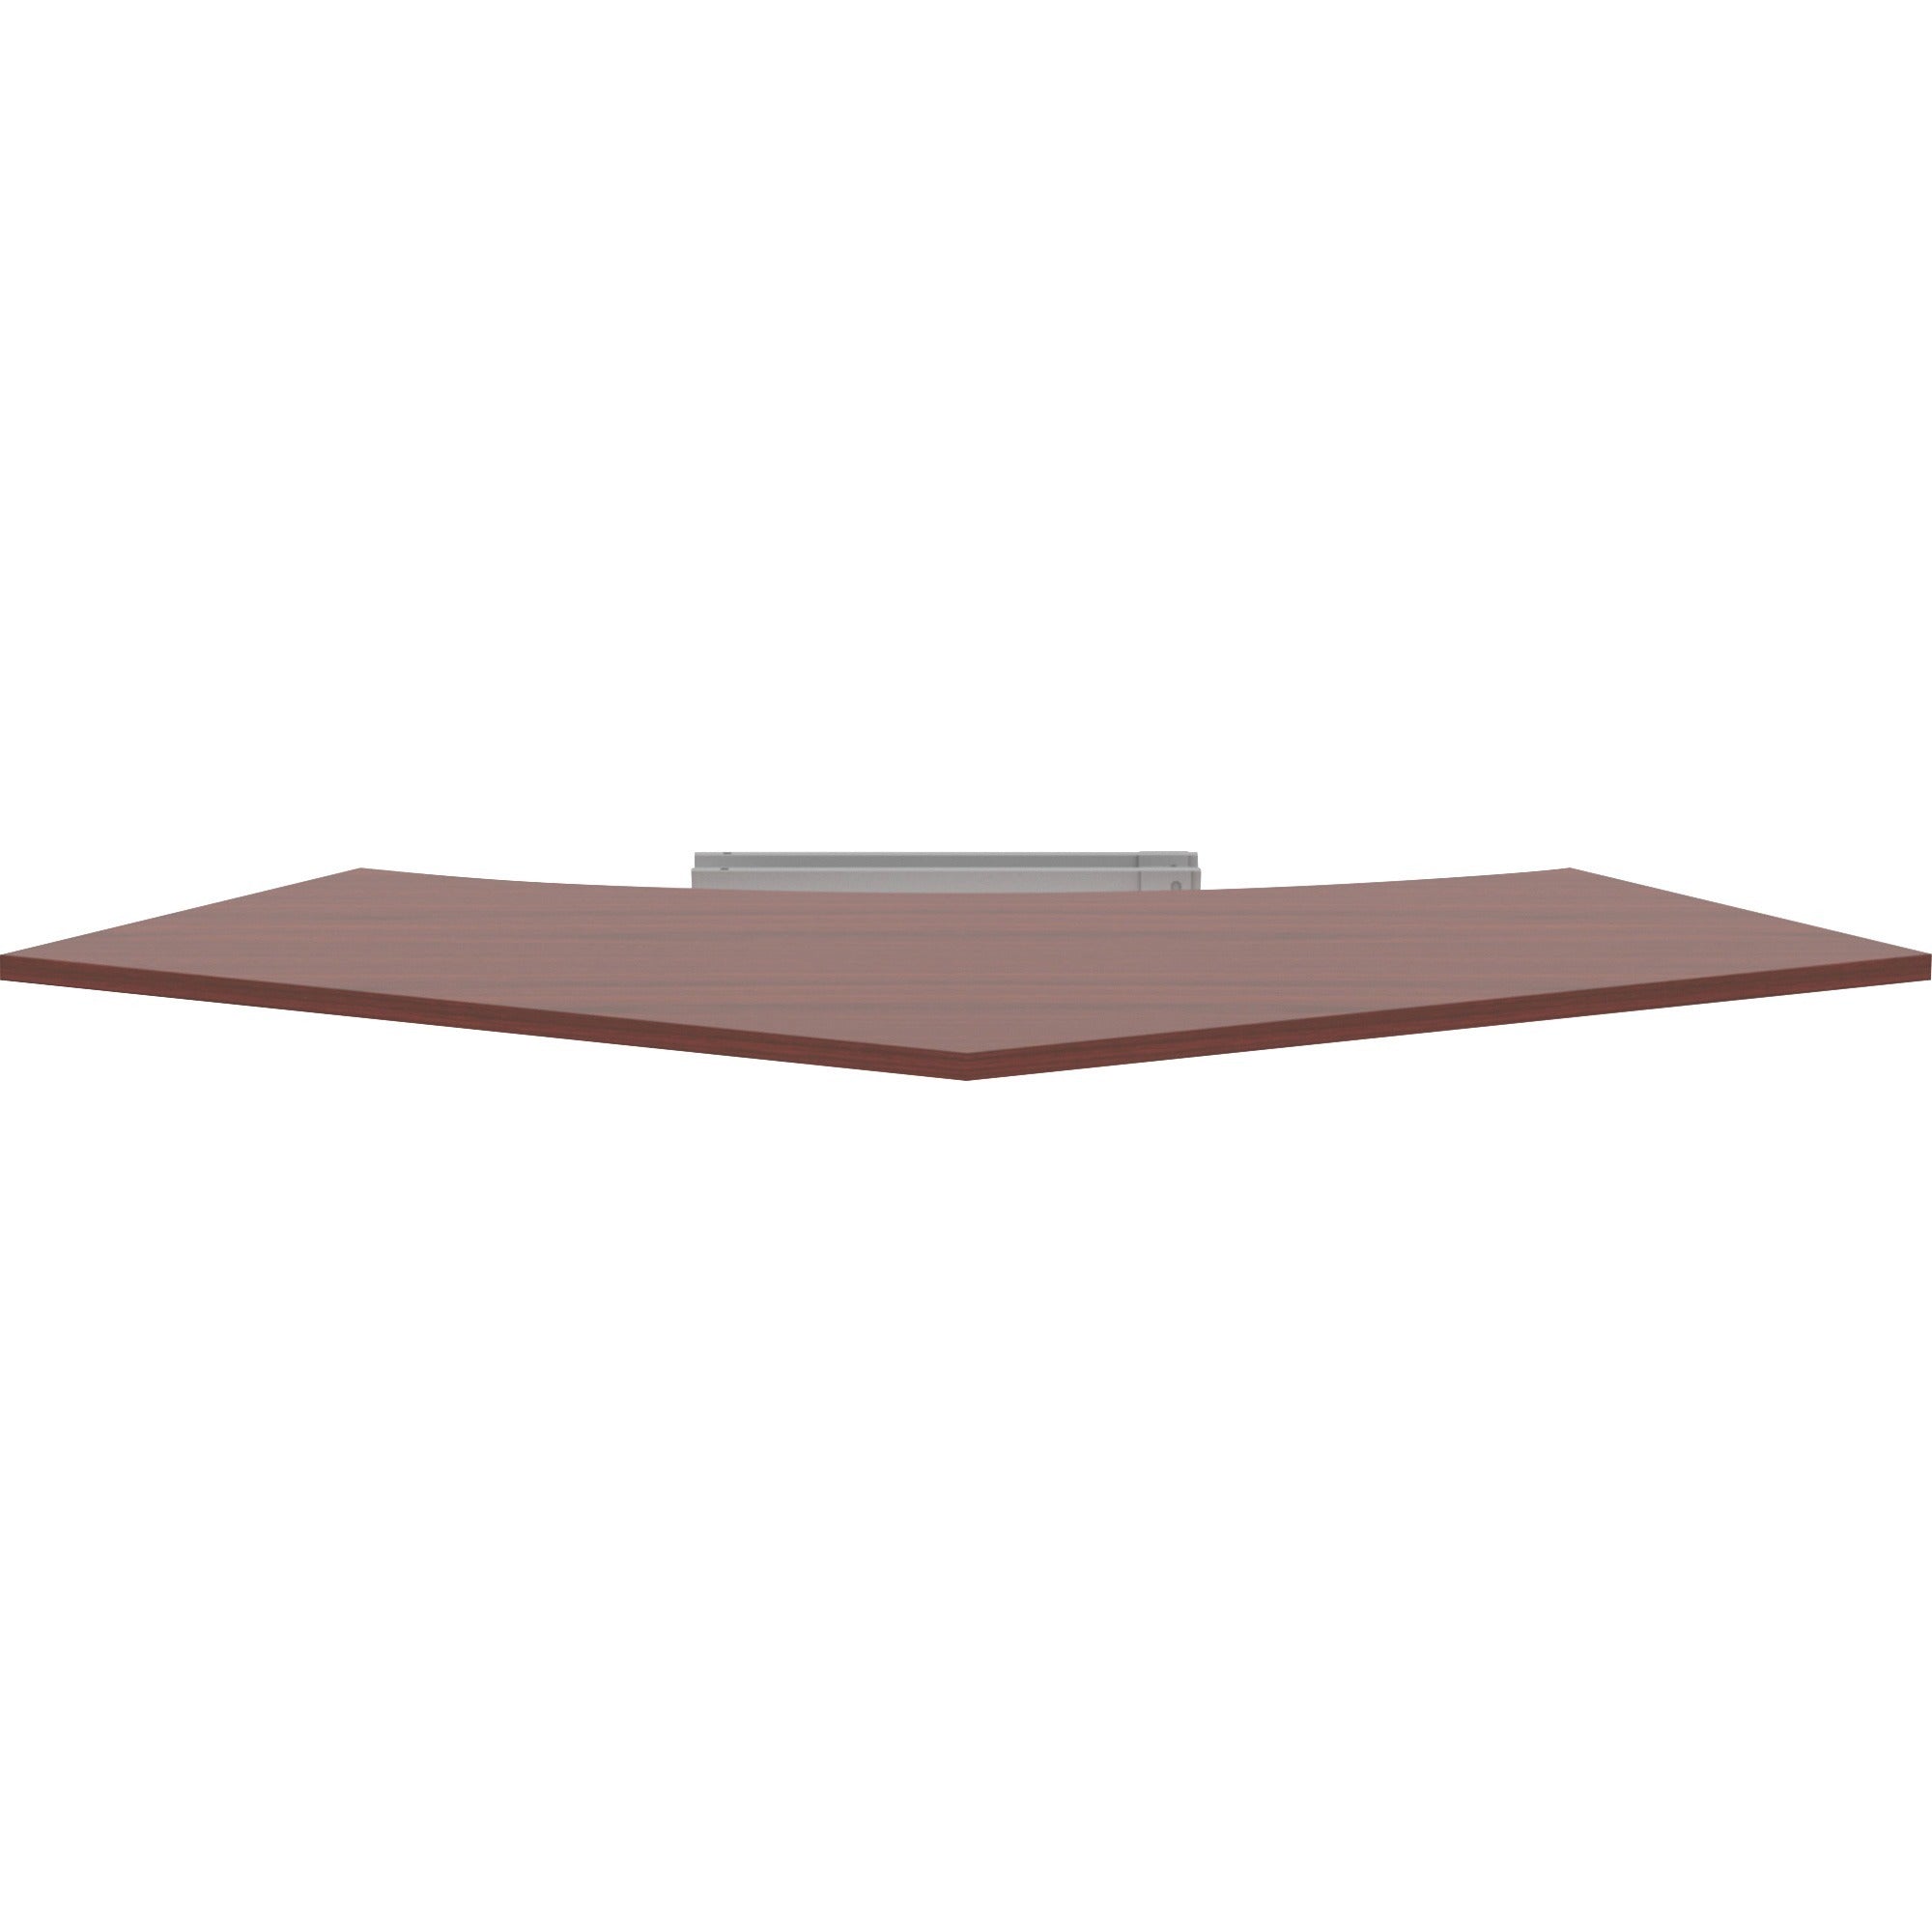 lorell-relevance-series-curve-worksurface-for-120-workstations-for-table-topmahogany-rectangle-top-contemporary-style-4725-table-top-length-x-3413-table-top-width-x-1-table-top-thickness-assembly-required-1-each_llr16248 - 3